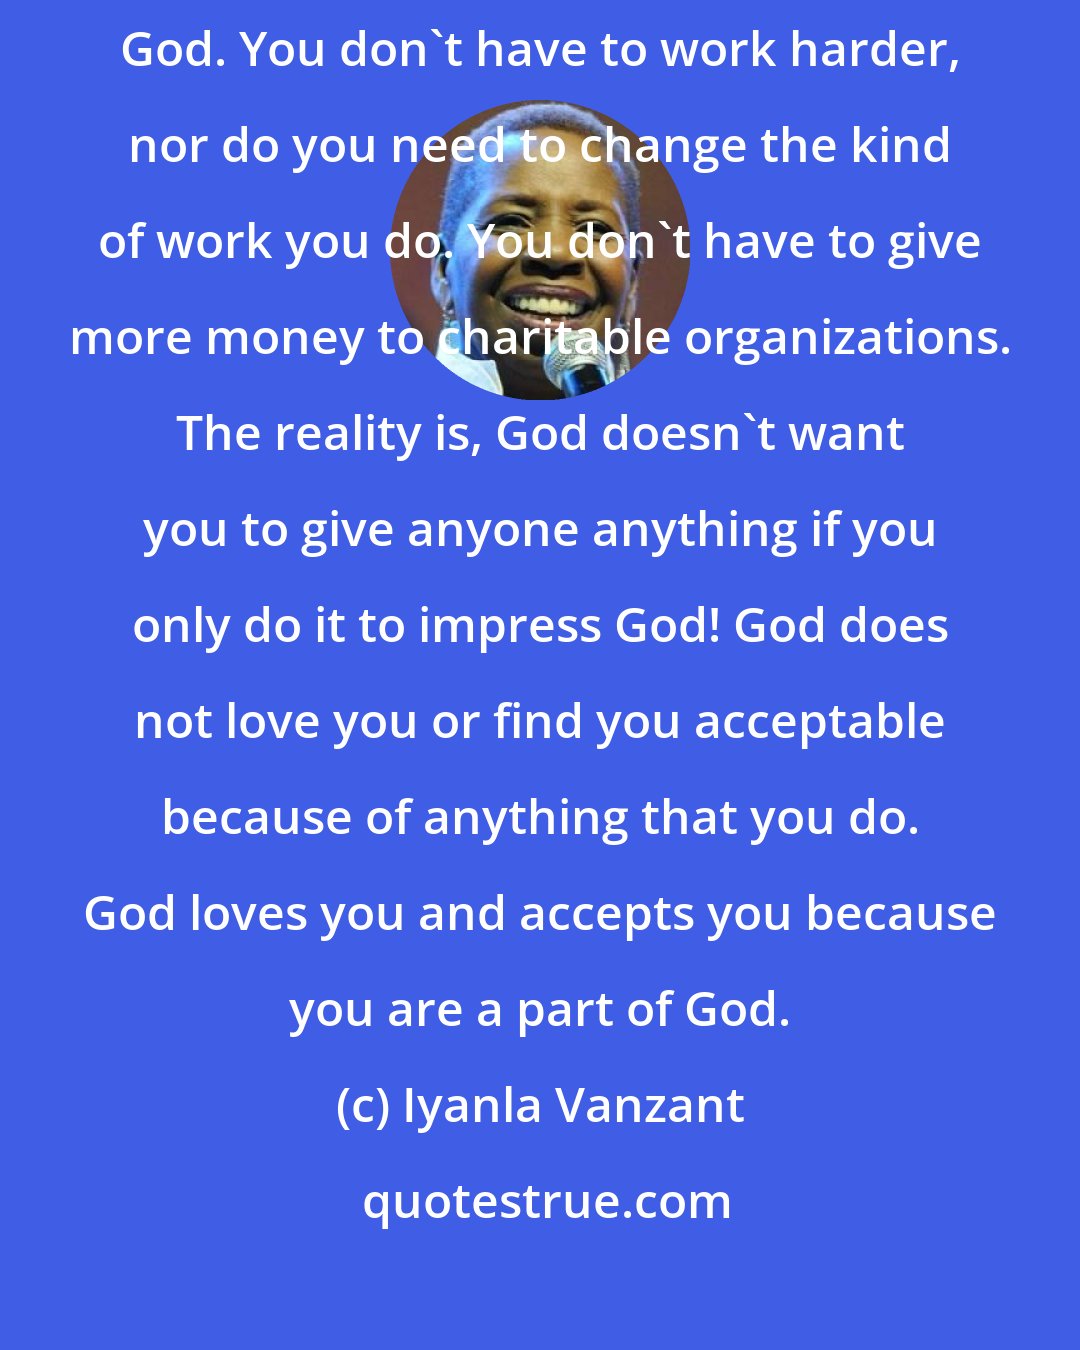 Iyanla Vanzant: There is nothing you need to do to make yourself more acceptable to God. You don't have to work harder, nor do you need to change the kind of work you do. You don't have to give more money to charitable organizations. The reality is, God doesn't want you to give anyone anything if you only do it to impress God! God does not love you or find you acceptable because of anything that you do. God loves you and accepts you because you are a part of God.